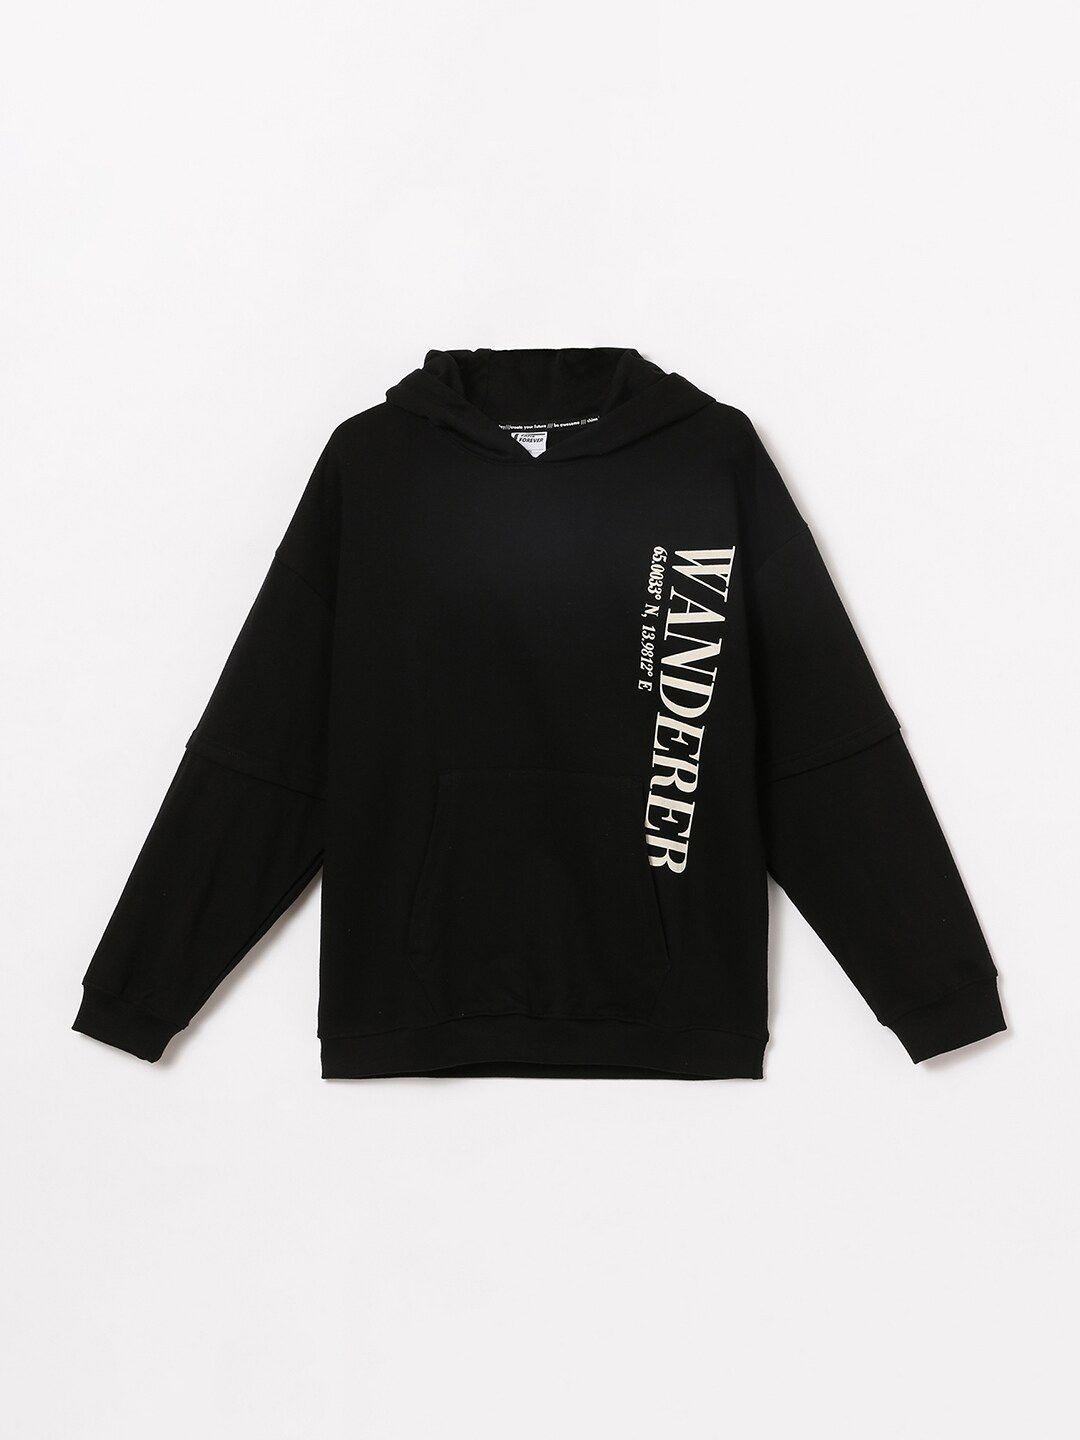 fame-forever-by-lifestyle-boys-printed-hooded-sweatshirt